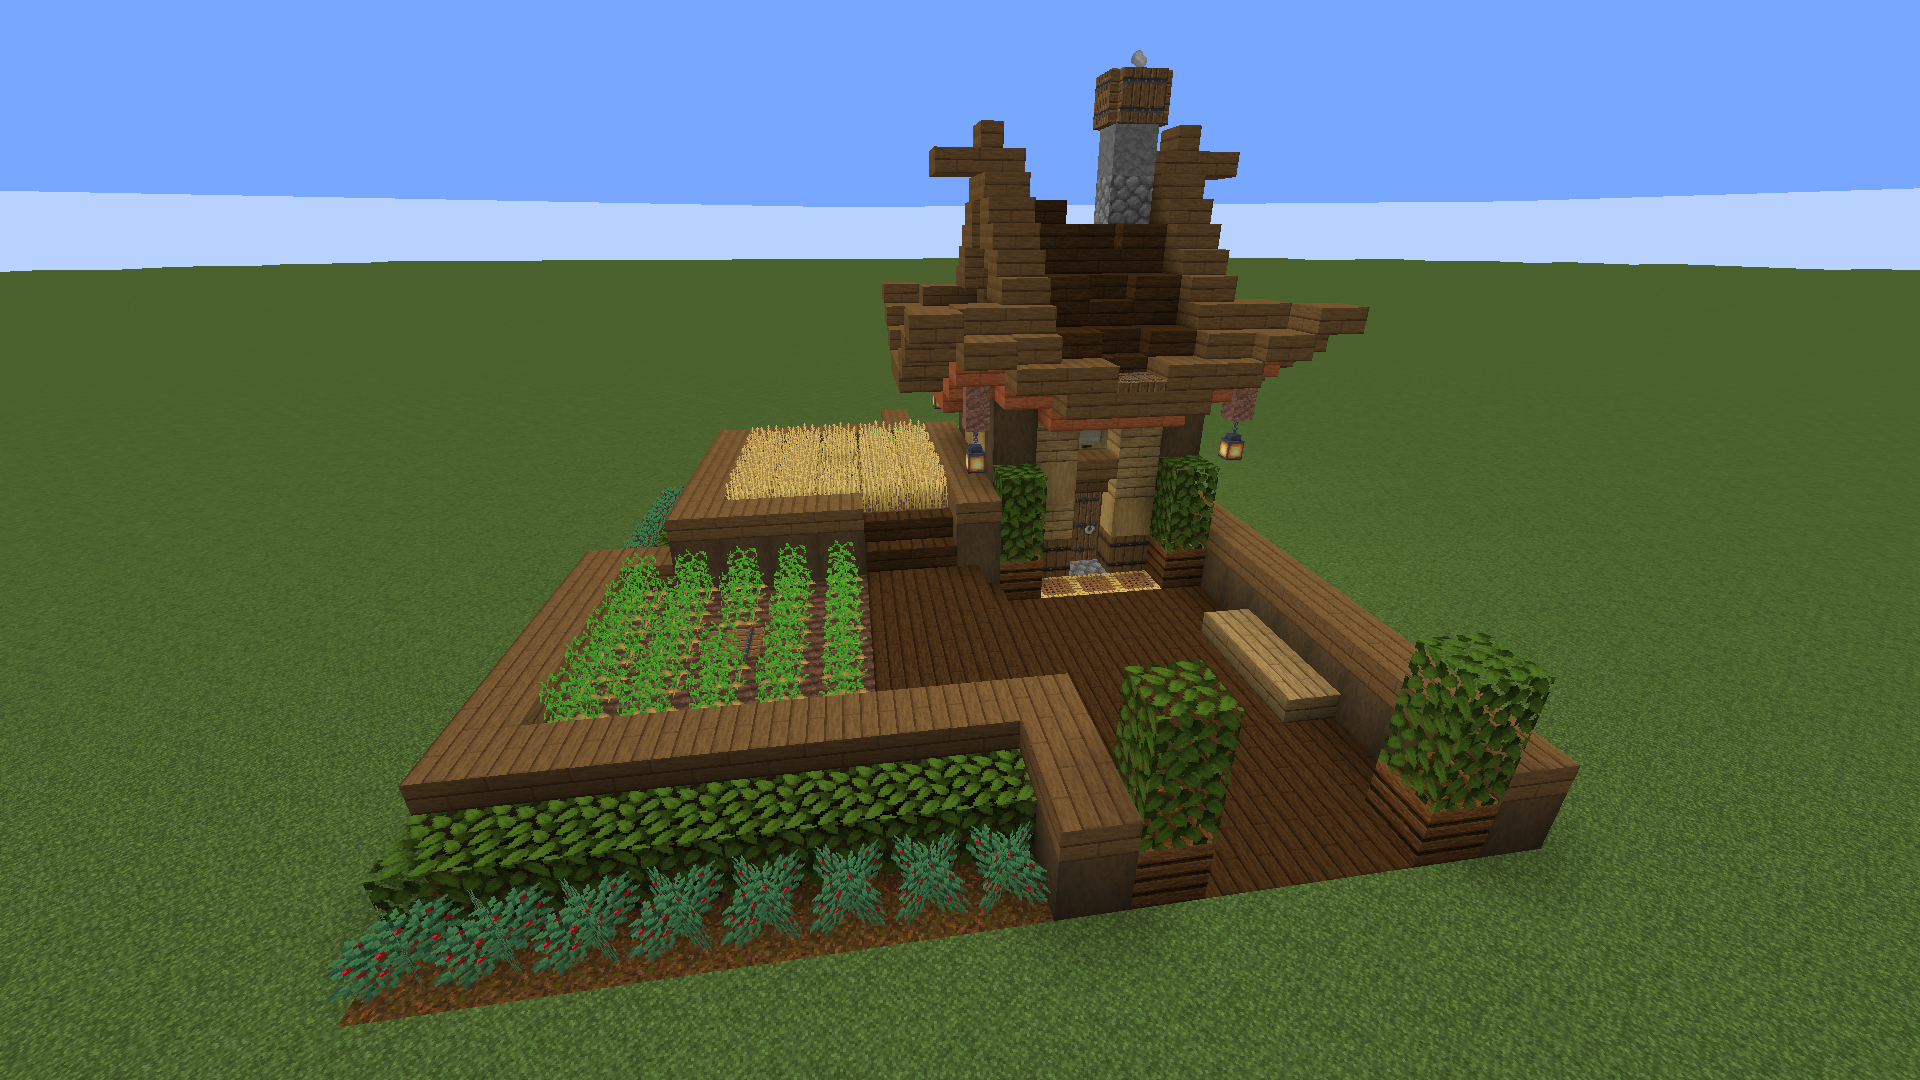 Minecract Tiny Starter Home With farm and interior schematic (litematic)